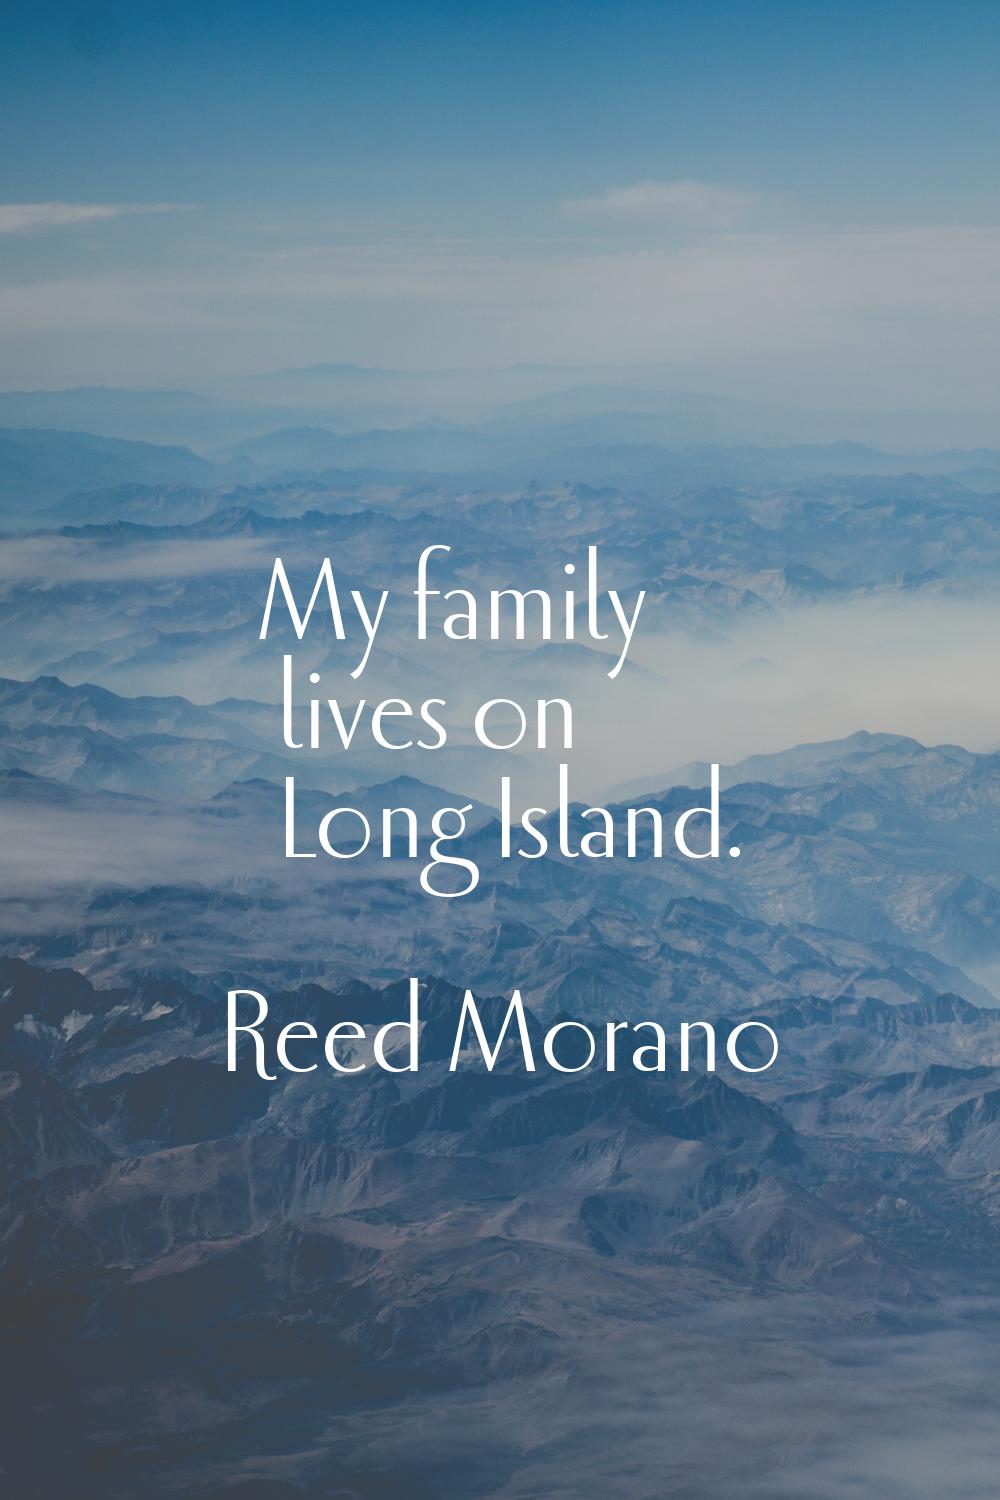 My family lives on Long Island.